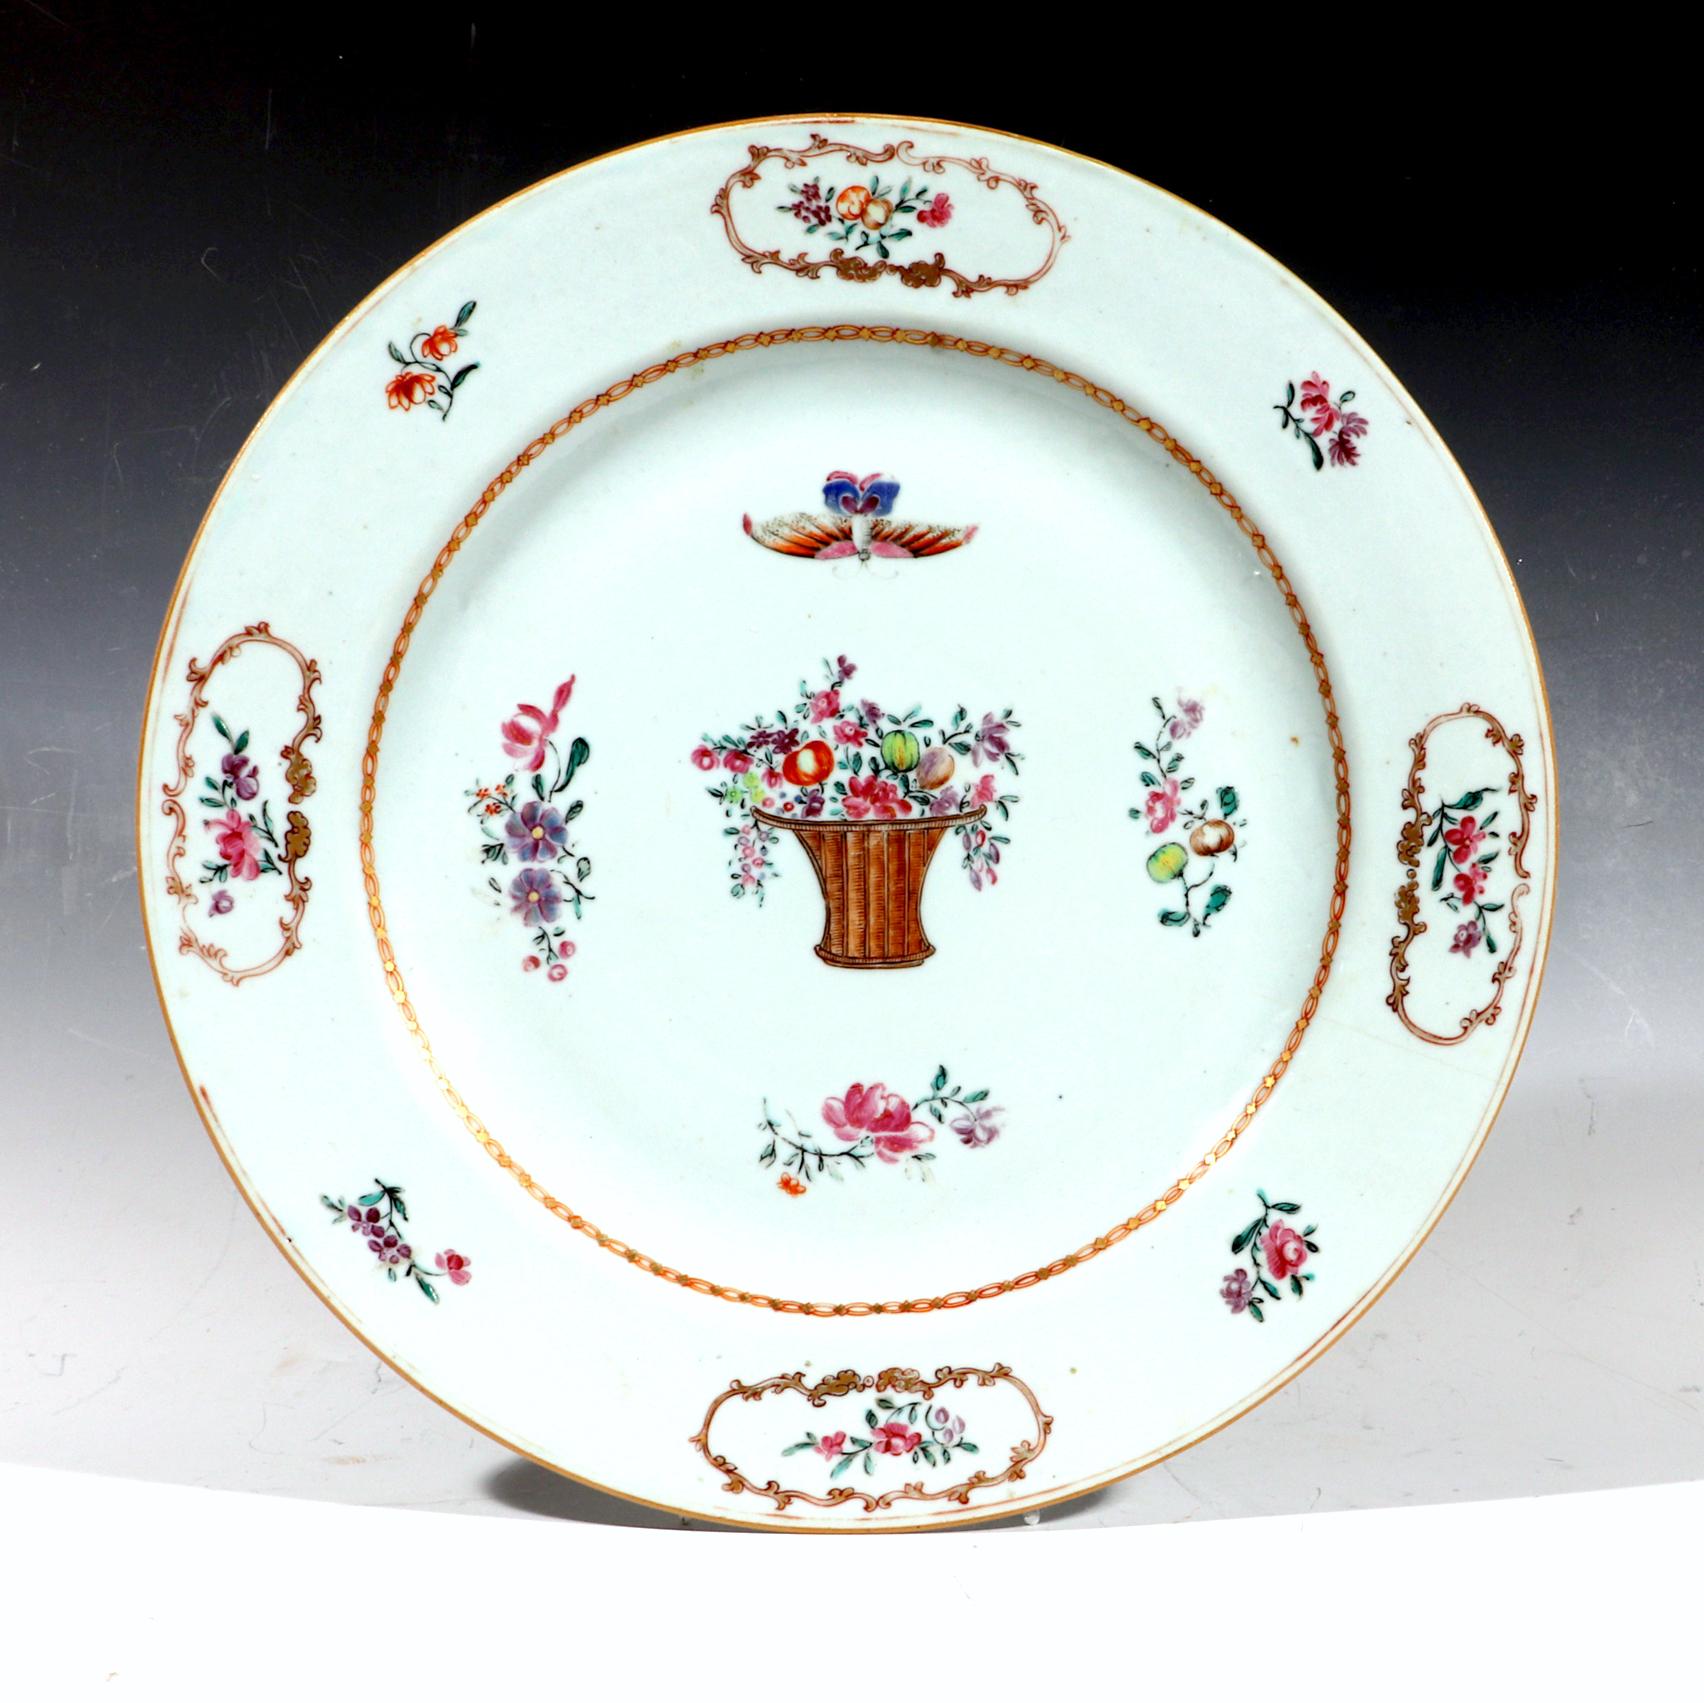 Chinese Export Famille rose porcelain dish with flower basket & butterfly,
circa 1765

The Chinese Export famille rose porcelain dish is painted in enamels with a central wicker flower basket overflowing with fruit and flowers and above is a